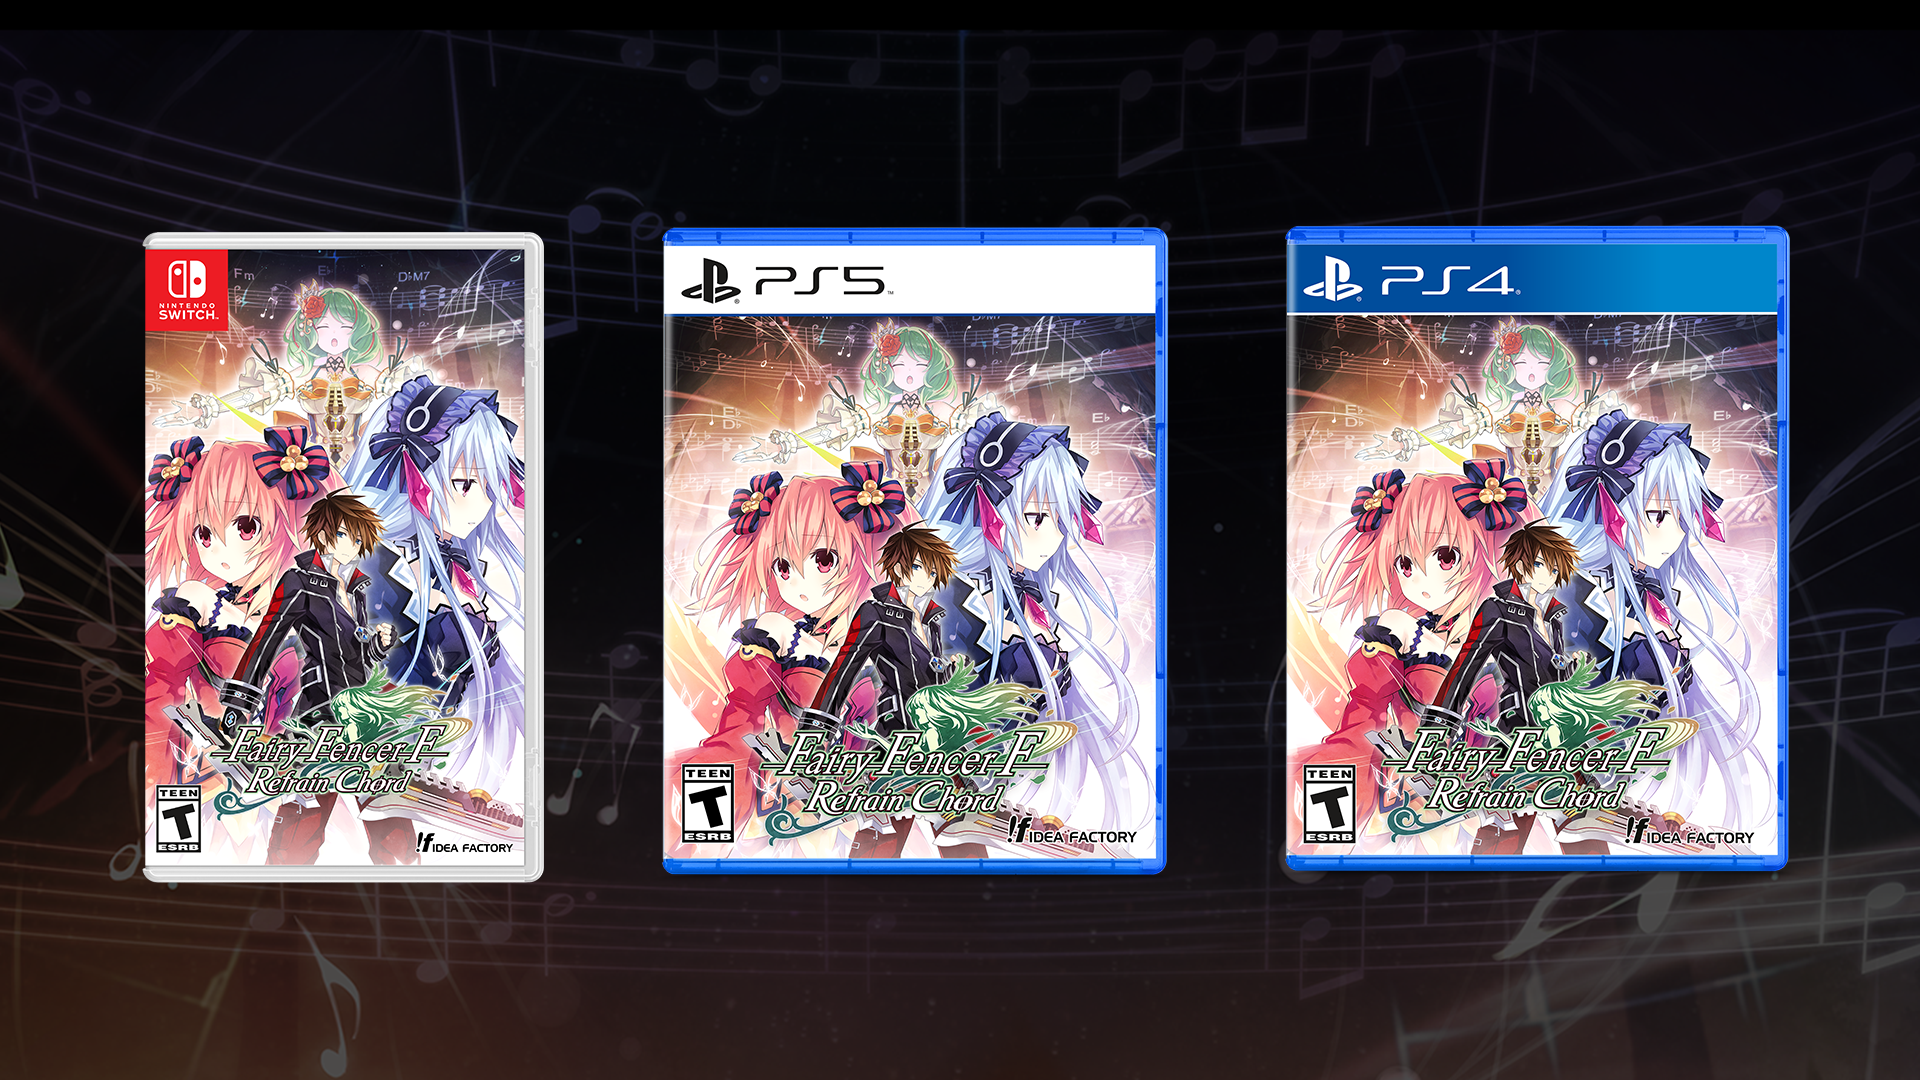 Fairy Fencer F: Refrain Chord Standard Edition (PS4/PS5/Switch)